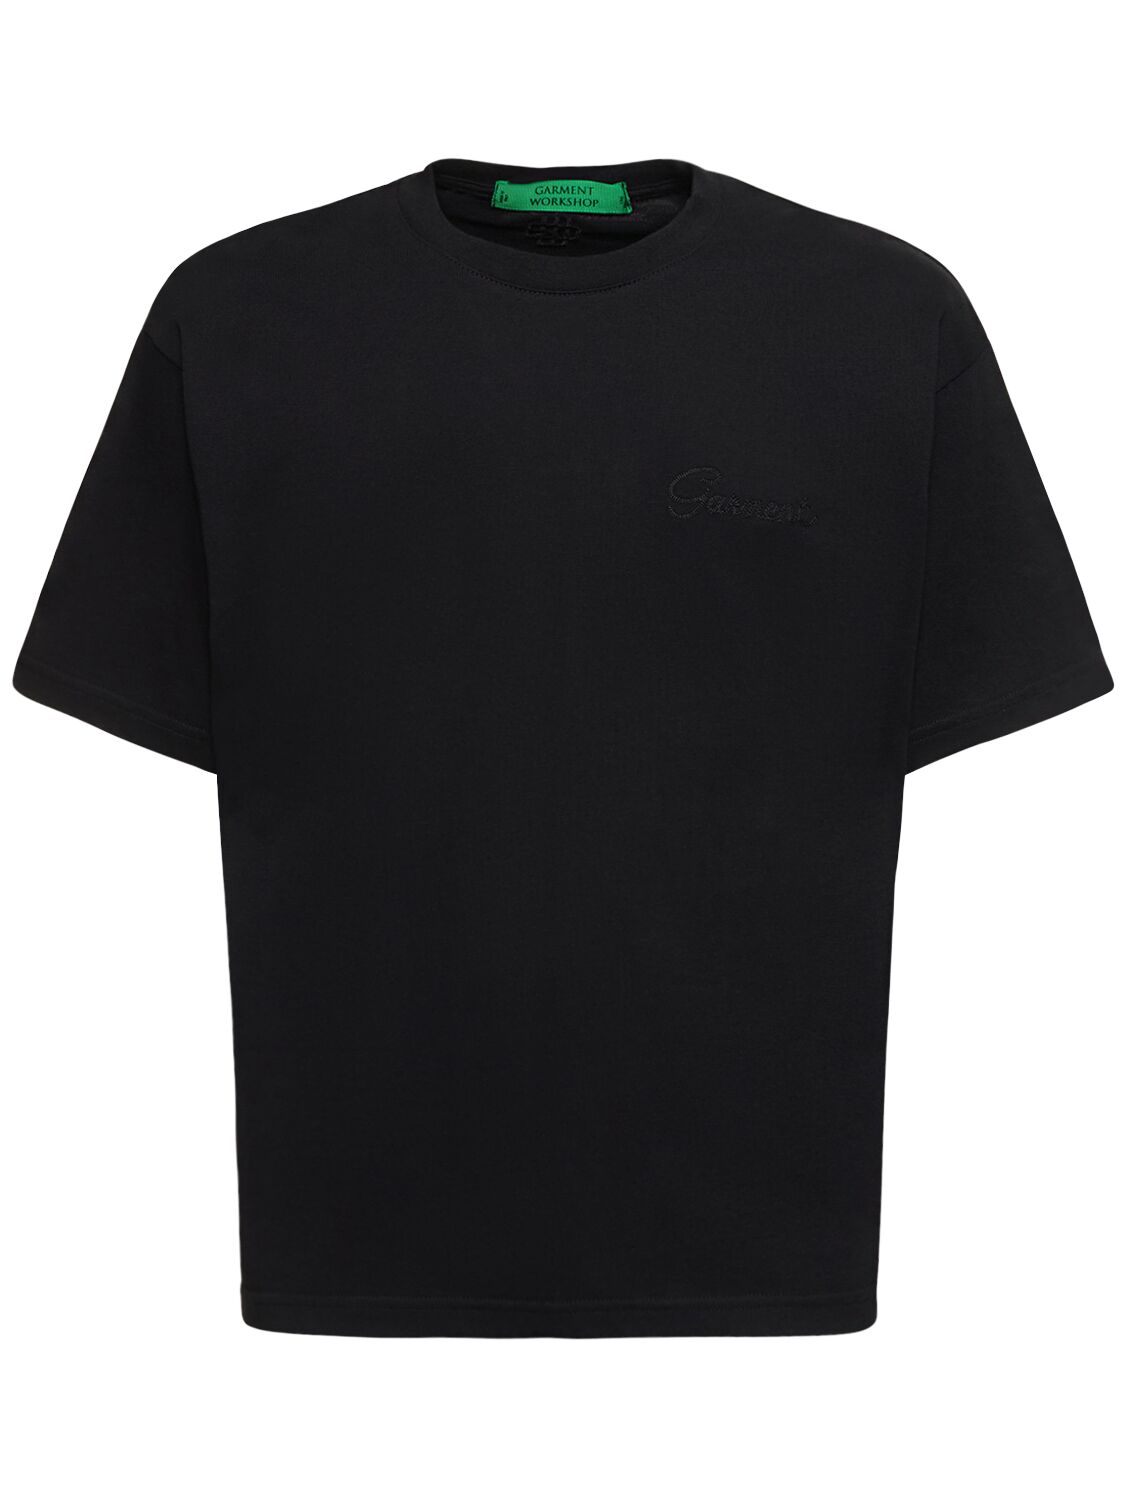 Garment Workshop Boxy Fit T-shirt W/ Double Embroidery In Chaos Black